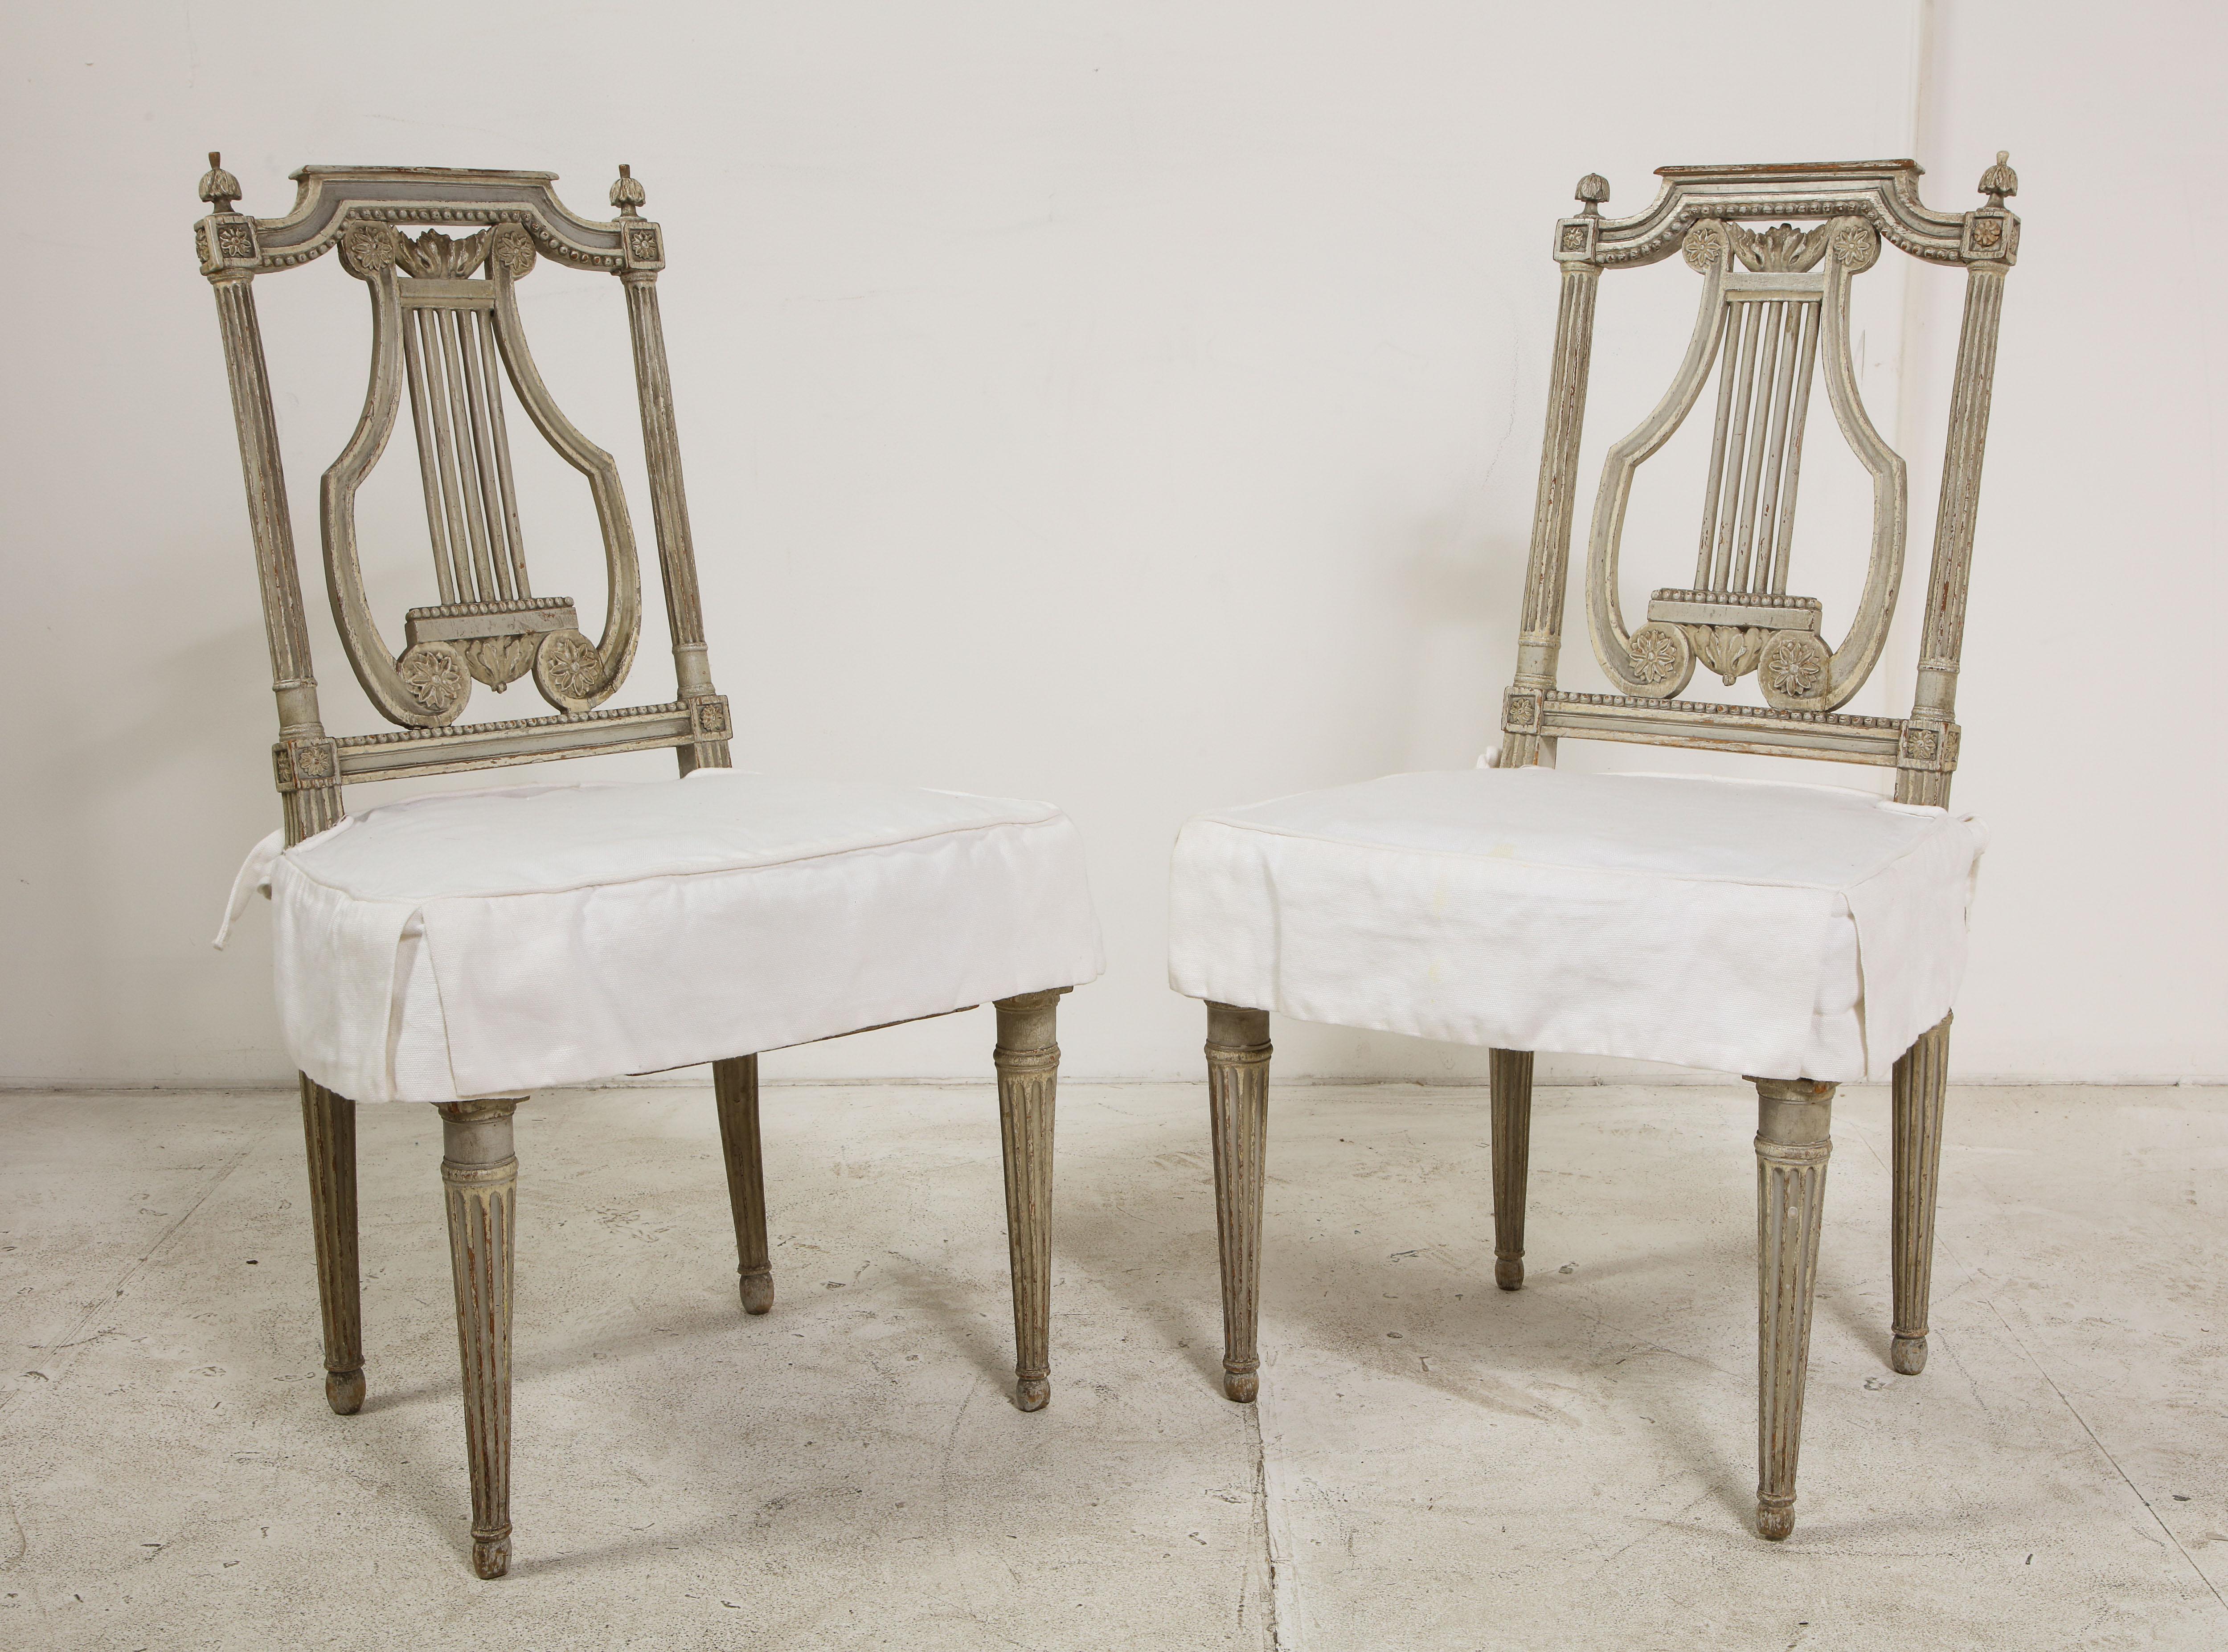 Pair of 19th Century Italian Painted Lyre-Back Chairs with Fortuny Seat Cushions 11